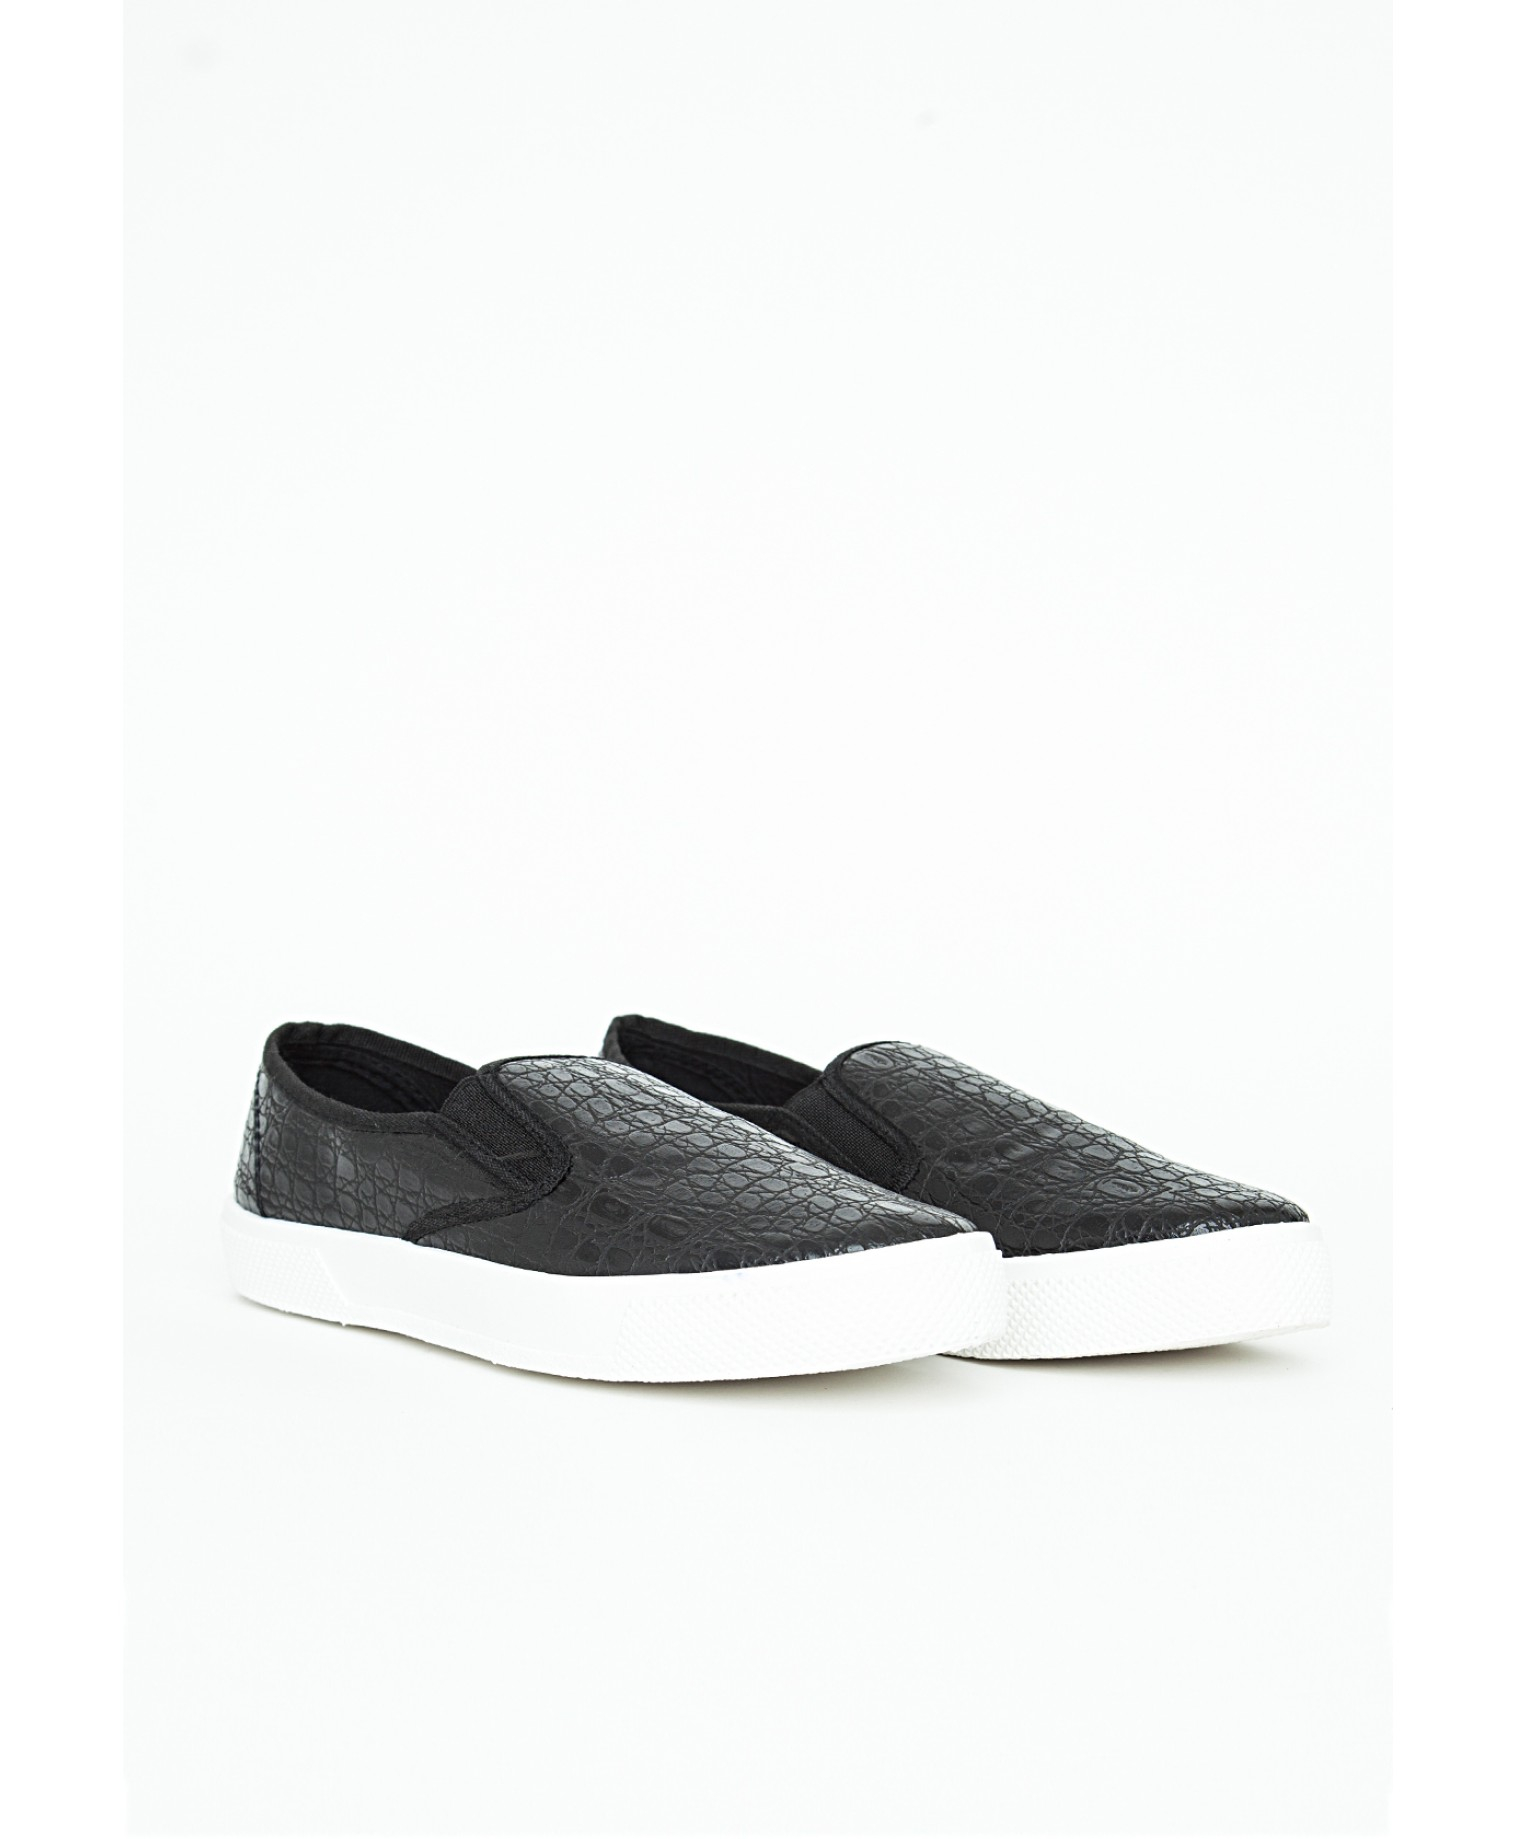 Missguided Cacey Croc Print Slip On 